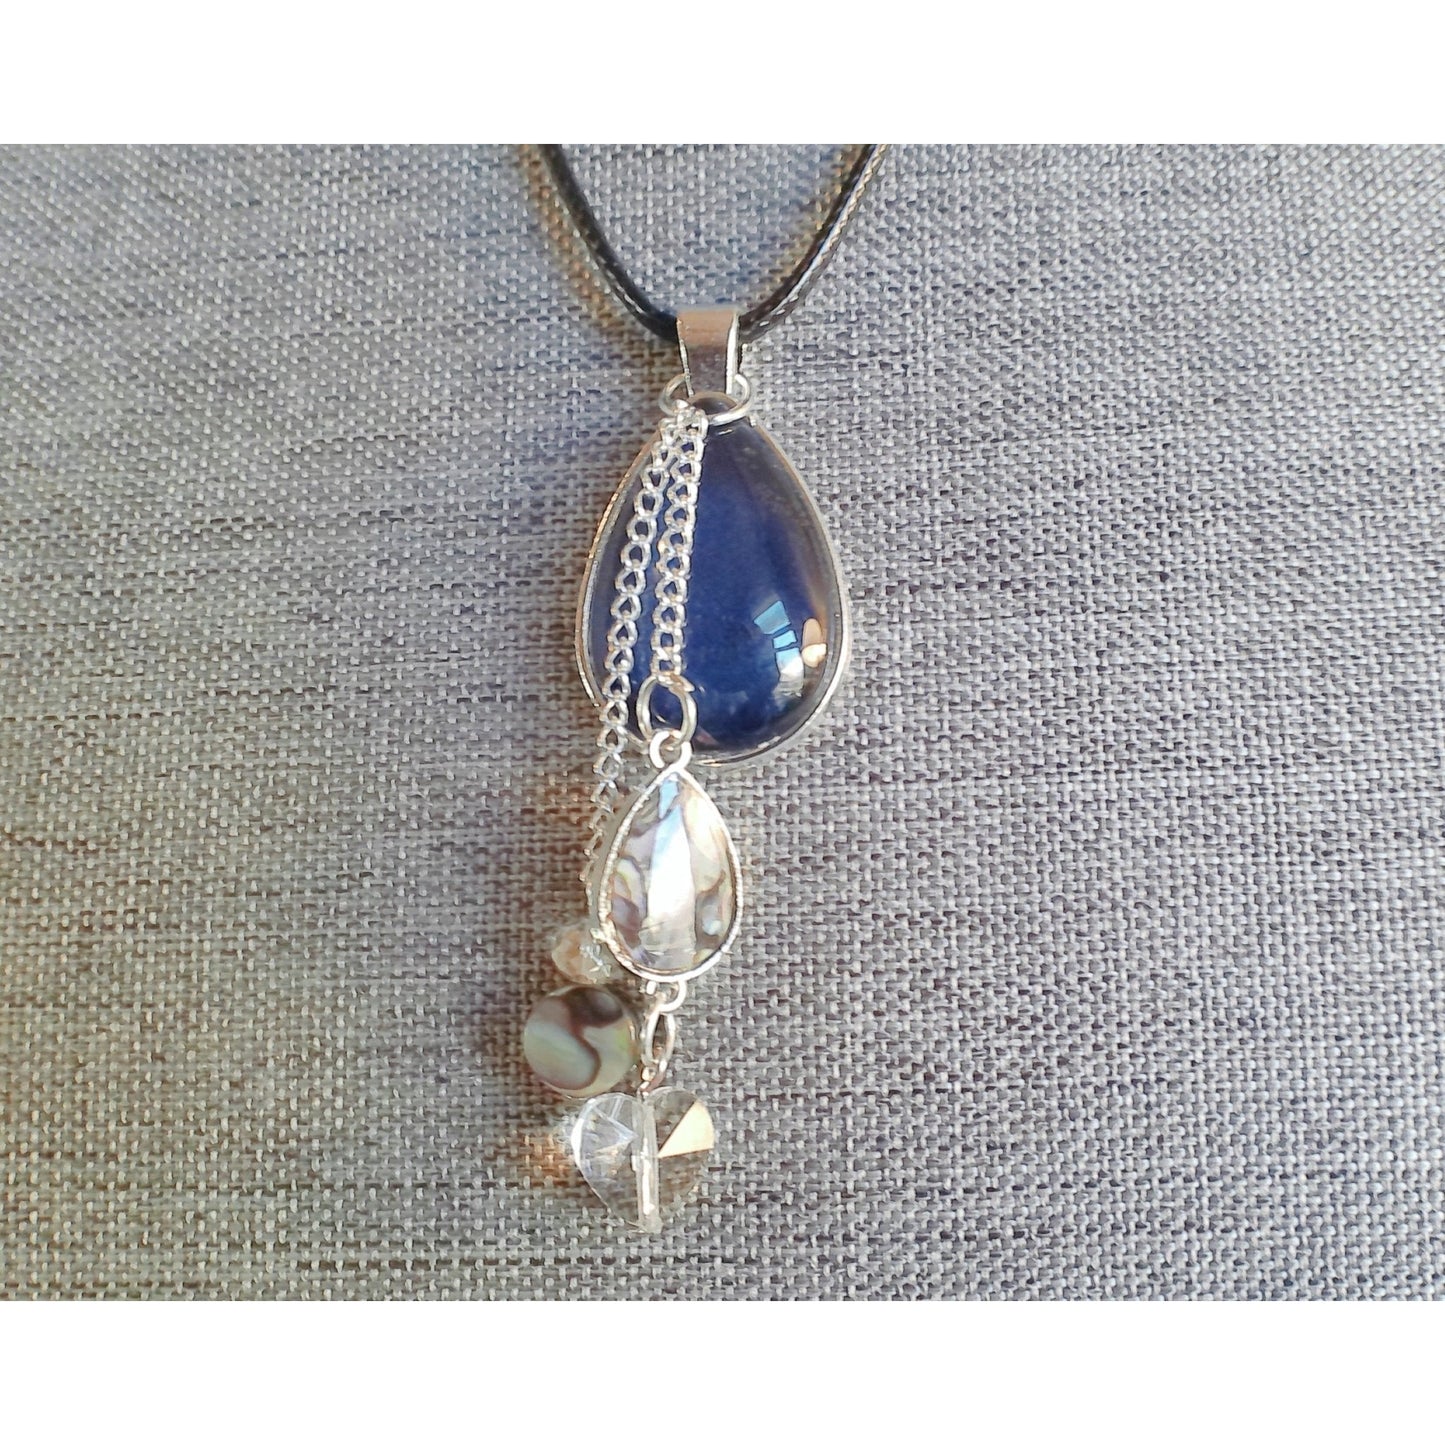 Dewdrop 4 Pendant Necklace - Rhapsody and Renascence